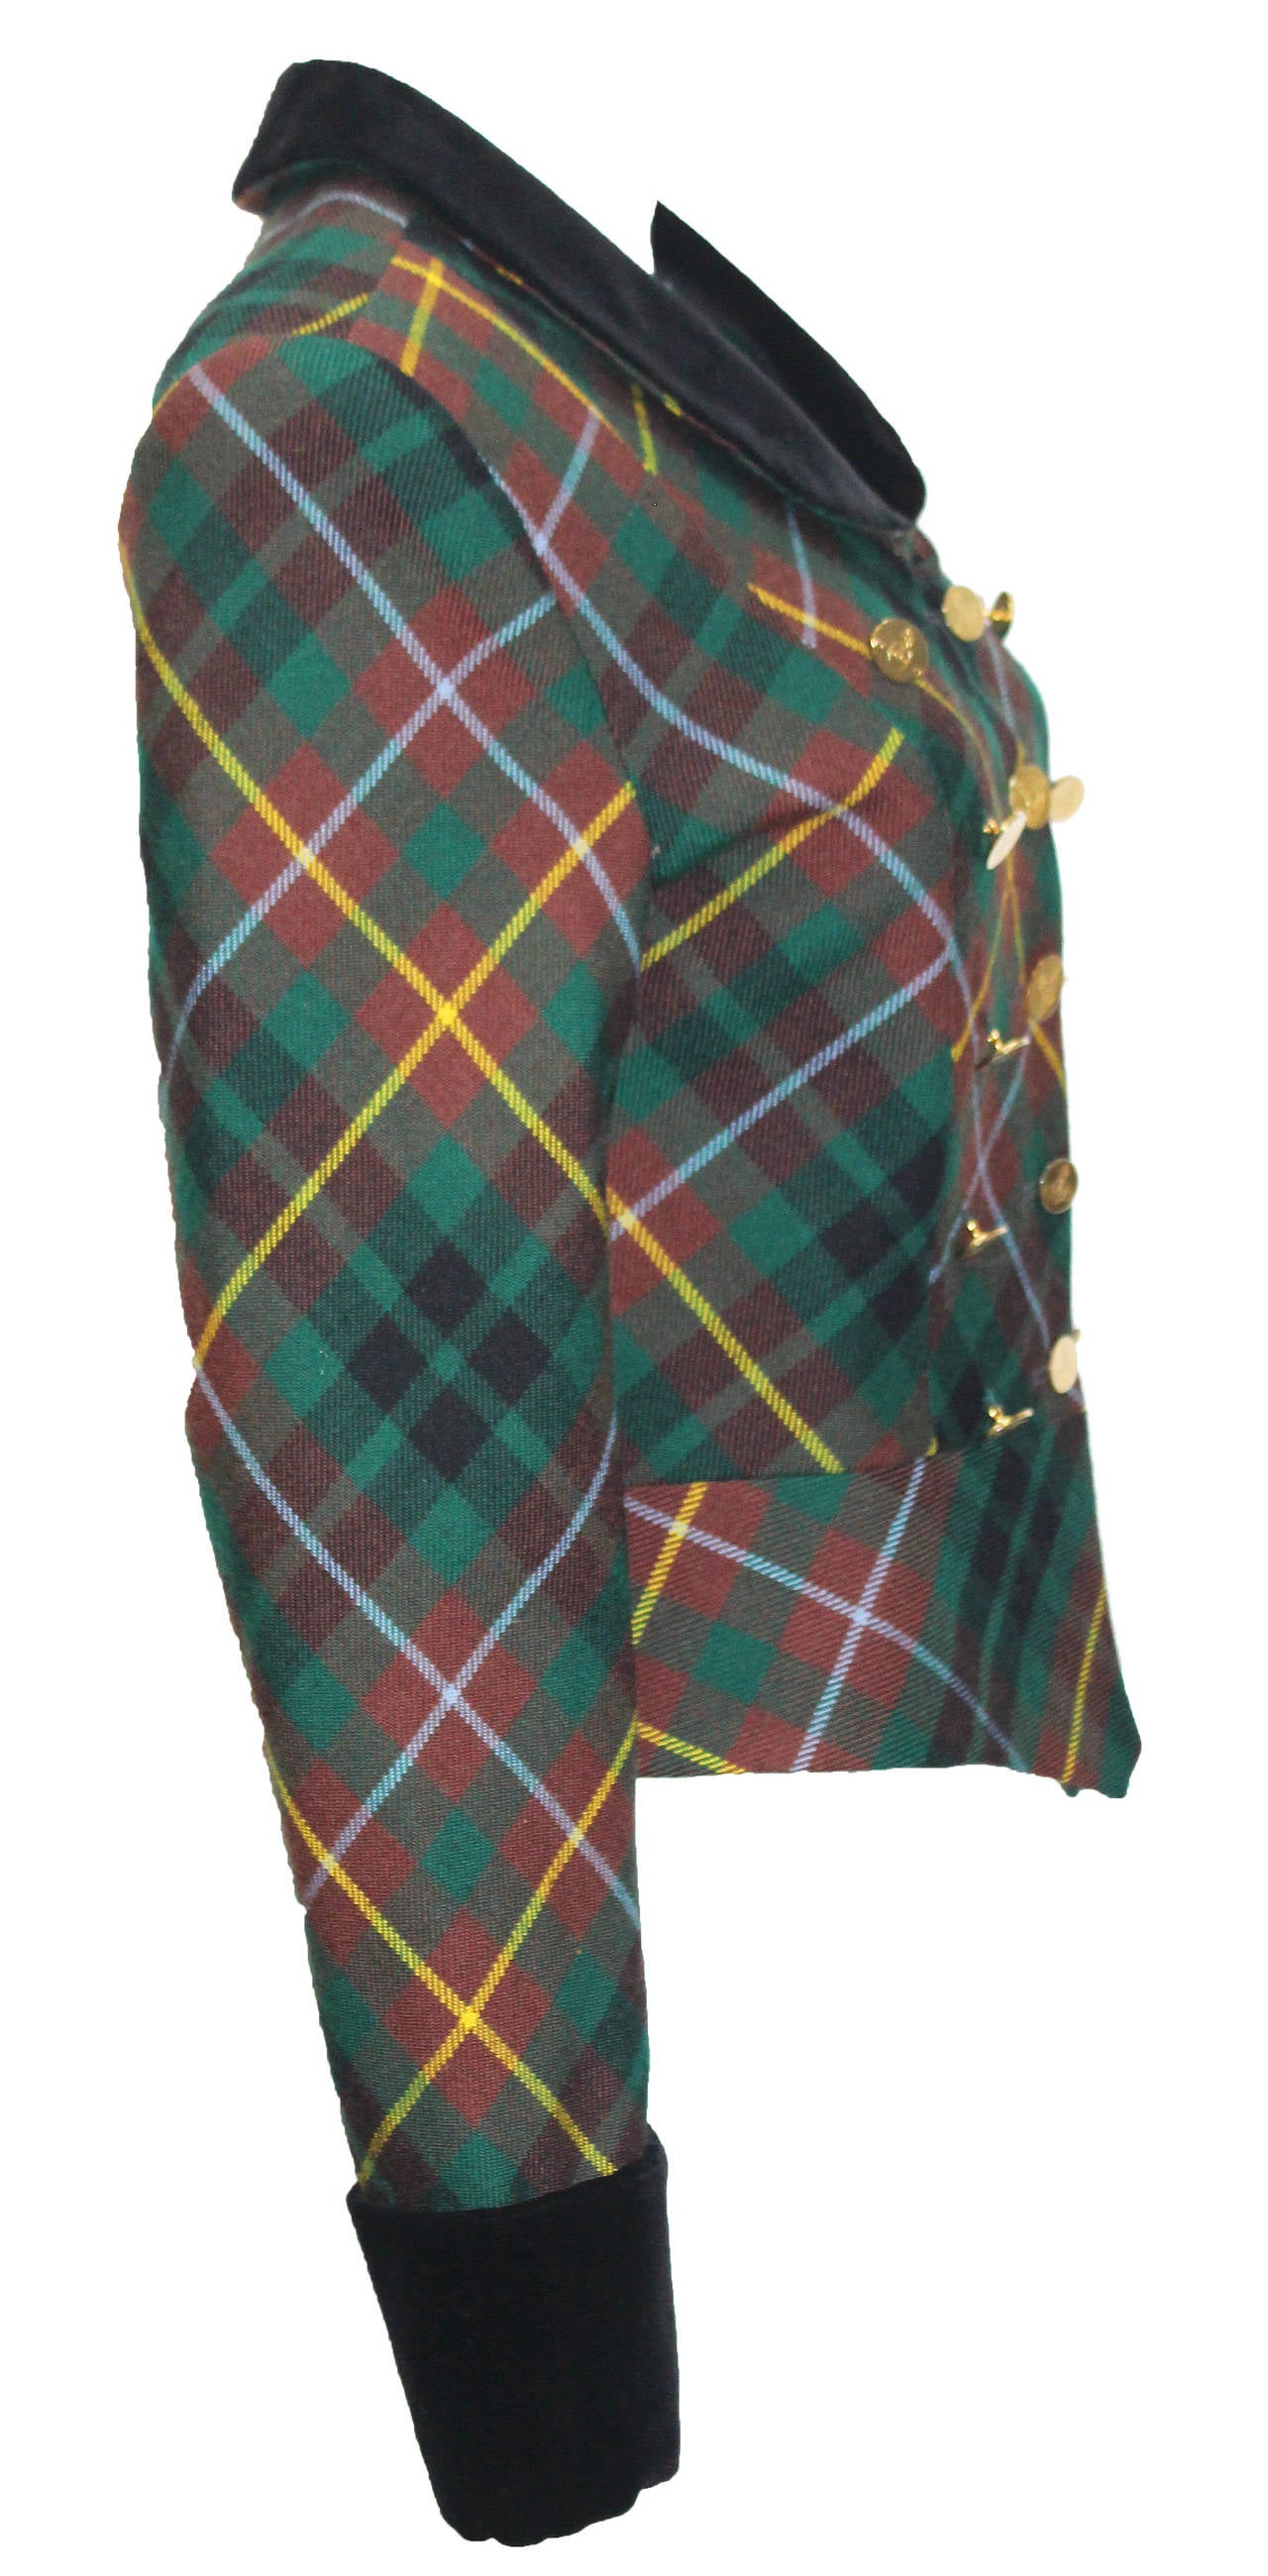 Autumn/Winter 1988 

A Vivienne Westwood tartan plaid wool jacket with black velvet 'Peter Pan' collar and cuffs, 15 gold 'orb' buttons and silk lining. 

Size Fr 36-38 / UK 8-10 / US 6-8